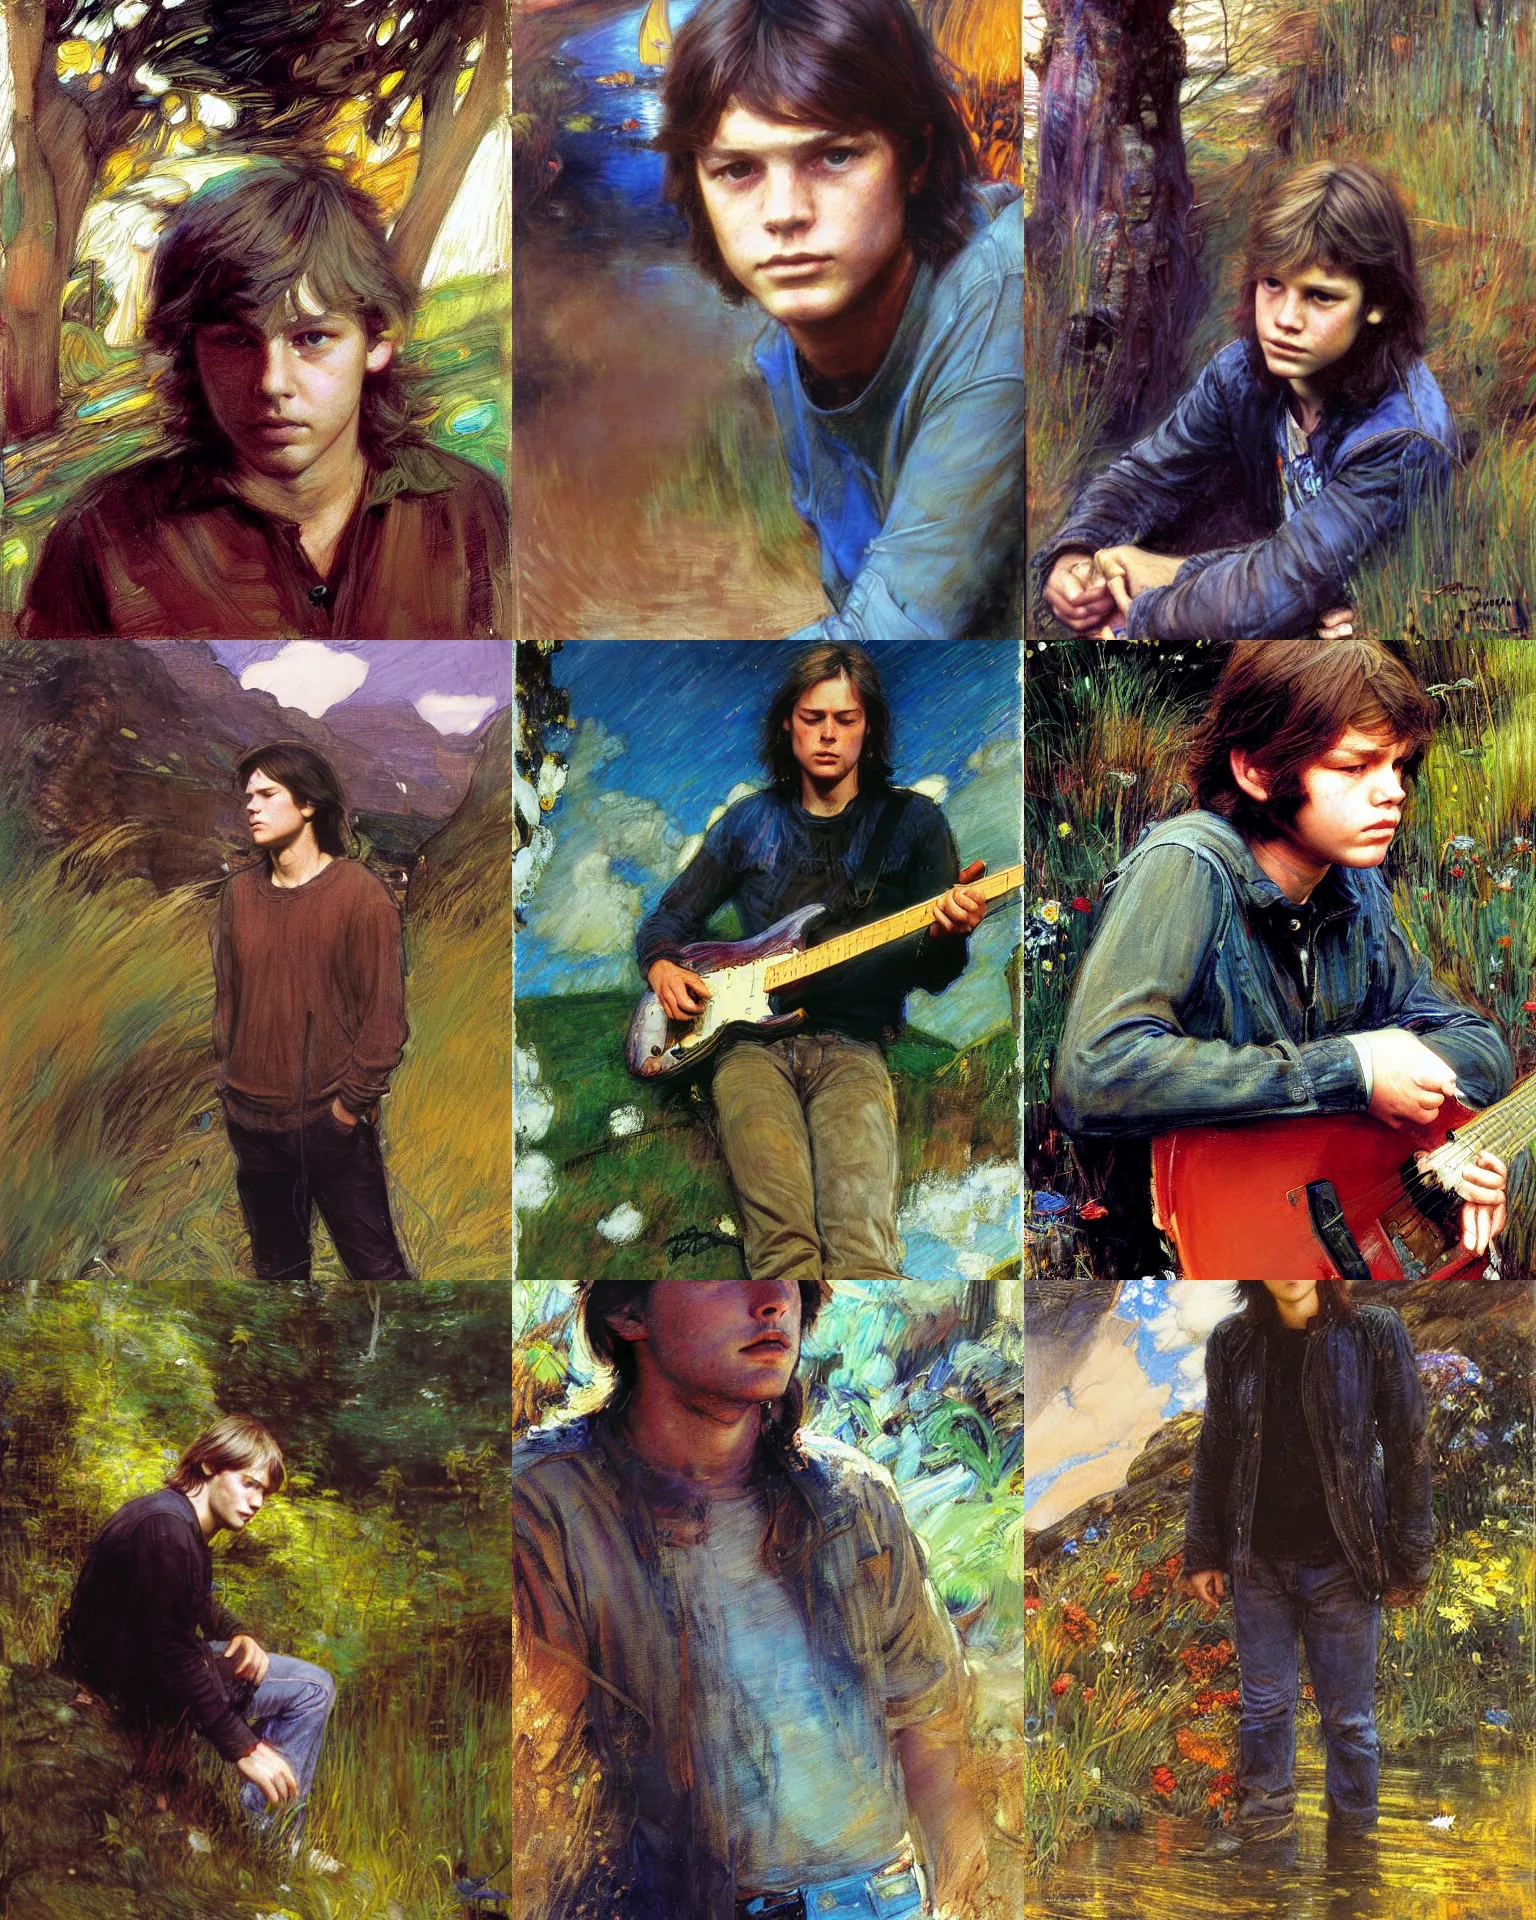 Prompt: young david gilmour looking down, psychedelic plein air portrait painting by richard schmid, john william waterhouse, thomas moran, studio ghibli, donato giancola,